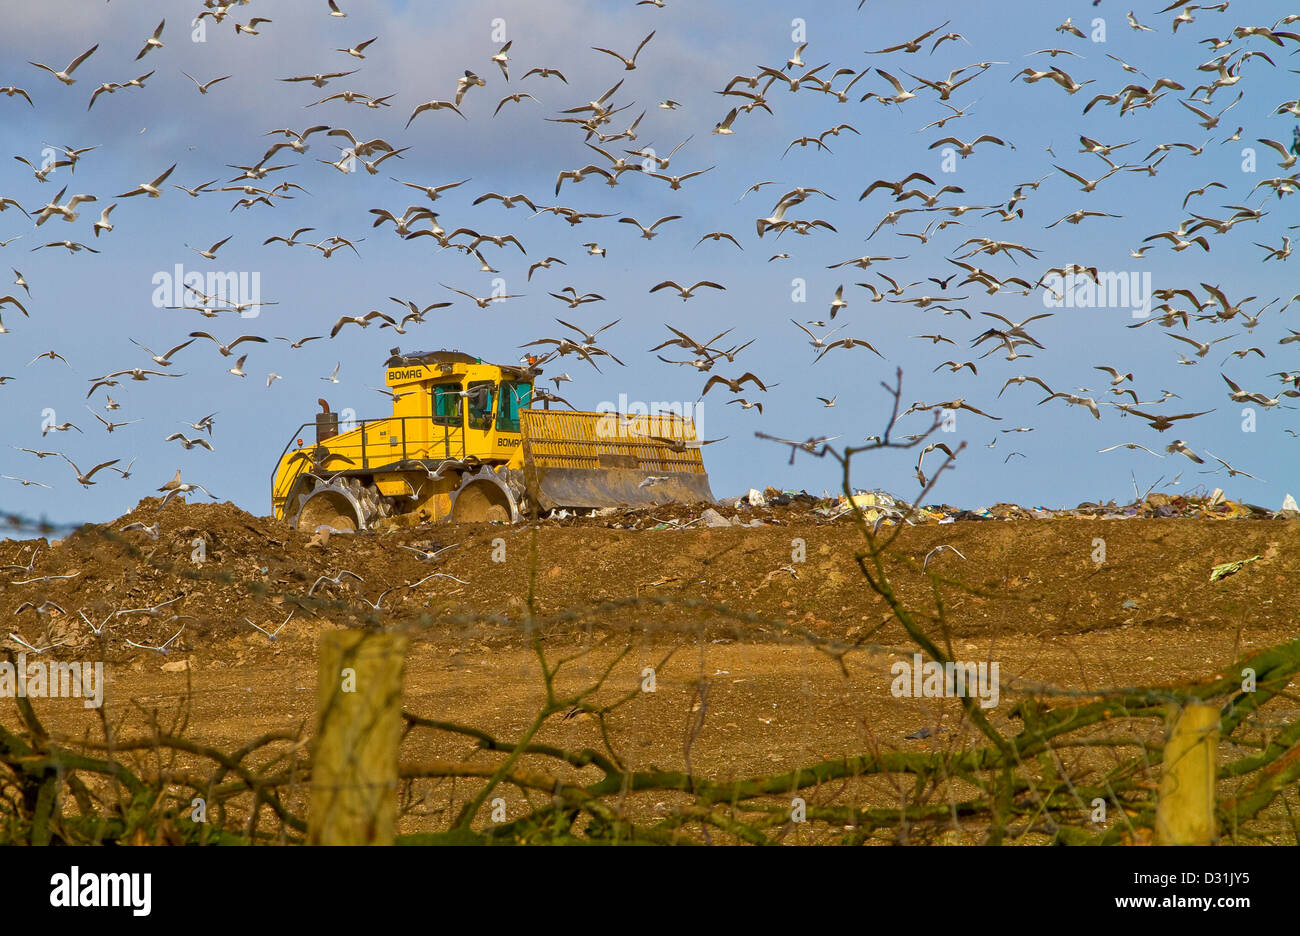 recycling tip with big yellow bulldozer and hundreds of scavenging seagulls a vision of the future Stock Photo